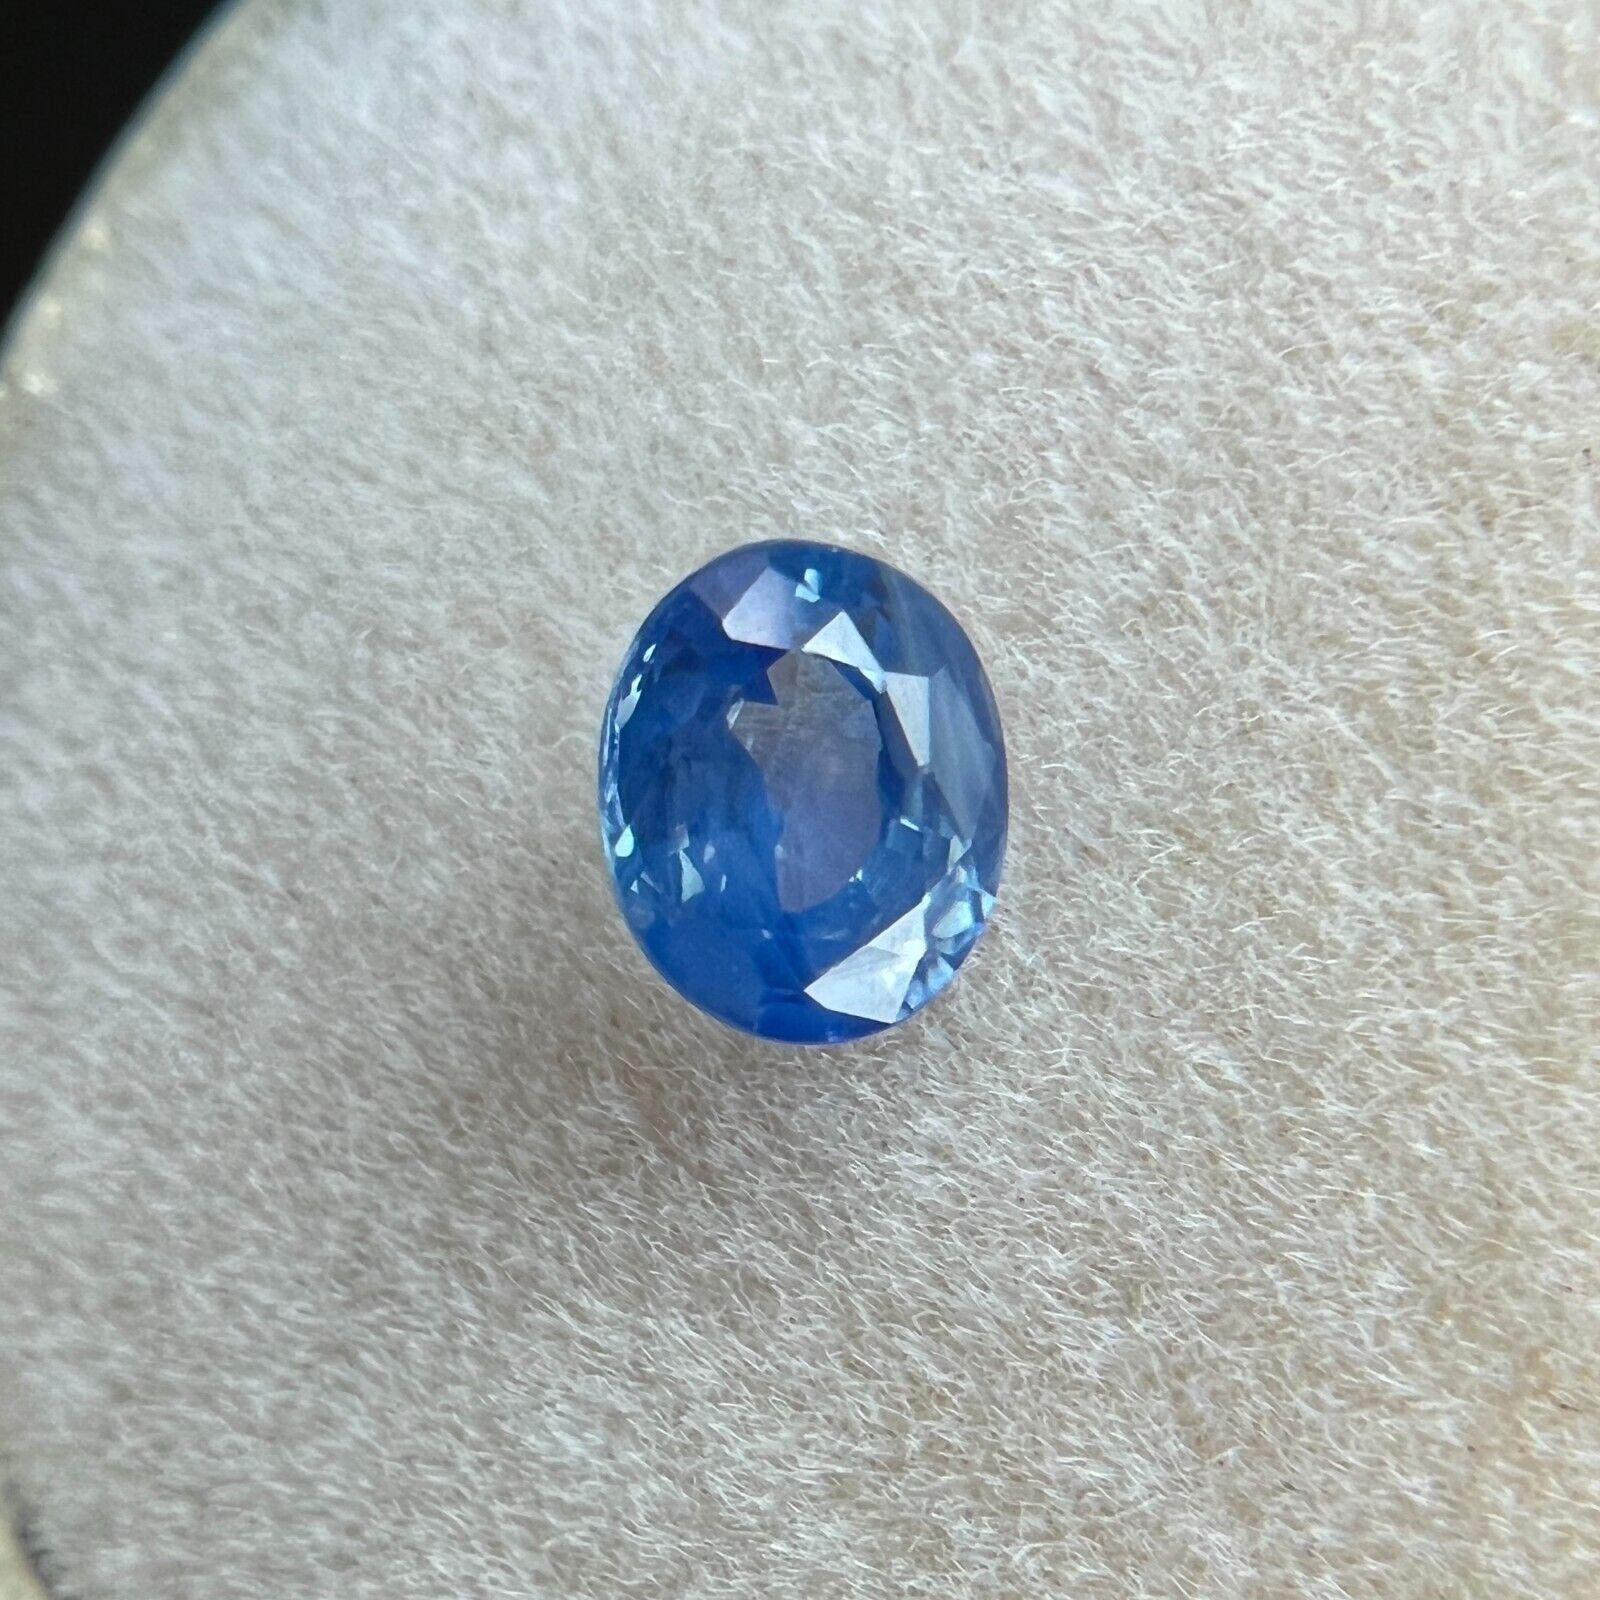 Fine Blue Ceylon Sapphire 0.60ct Oval Cut Rare Loose Cut Gemstone 5.4x4.5mm VS

Fine Blue Ceylon Sapphire Gemstone.
0.60 Carat with a beautiful light blue colour and good clarity, a clean stone with some small natural inclusions visible when looking